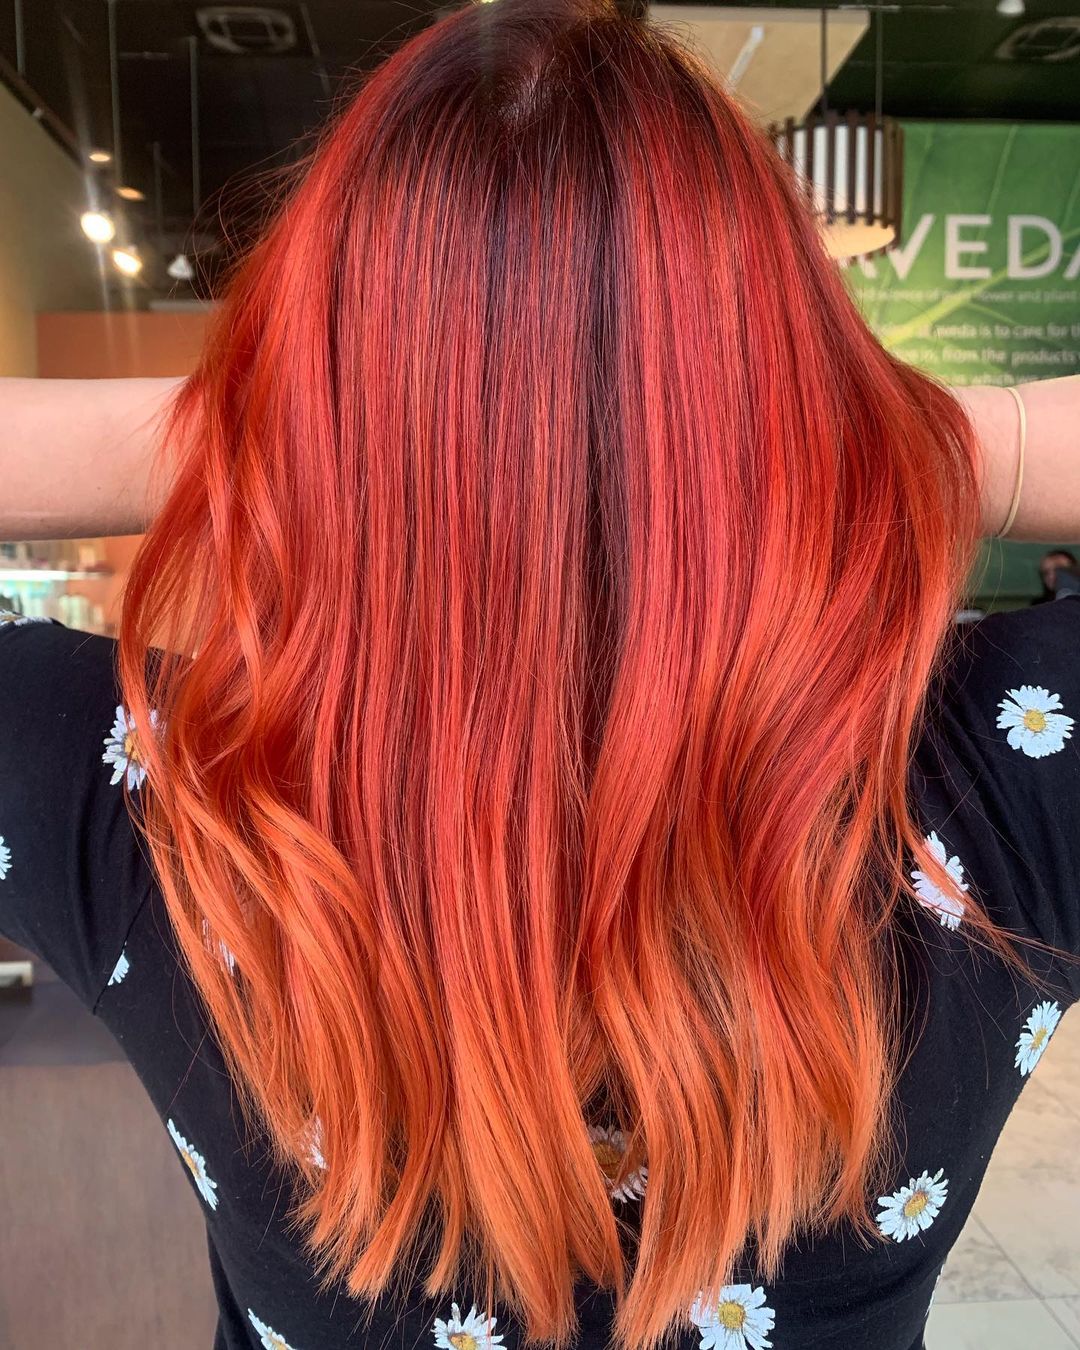 Red to Orange Ombre, Red Hair, Ombre Hair, Aveda Color, Aveda Ombre, Aveda Artist, Aveda Hair